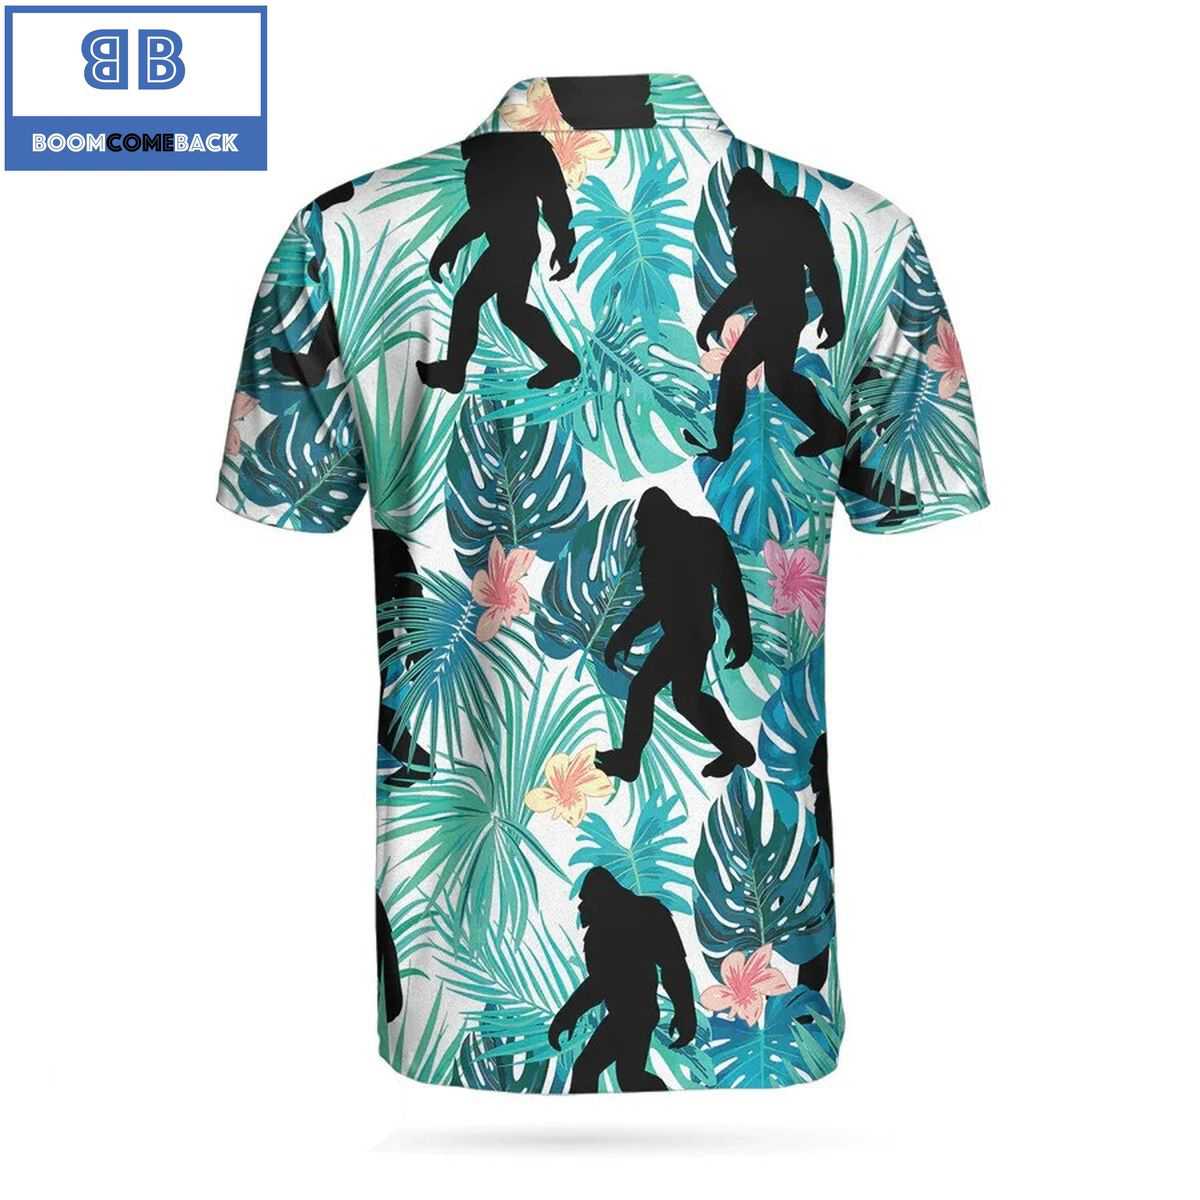 Golf2BTropical2BFloral2BAnd2BLeaves2BAthletic2BCollared2BMens2BPolo2BShirt2B4 2cNP7